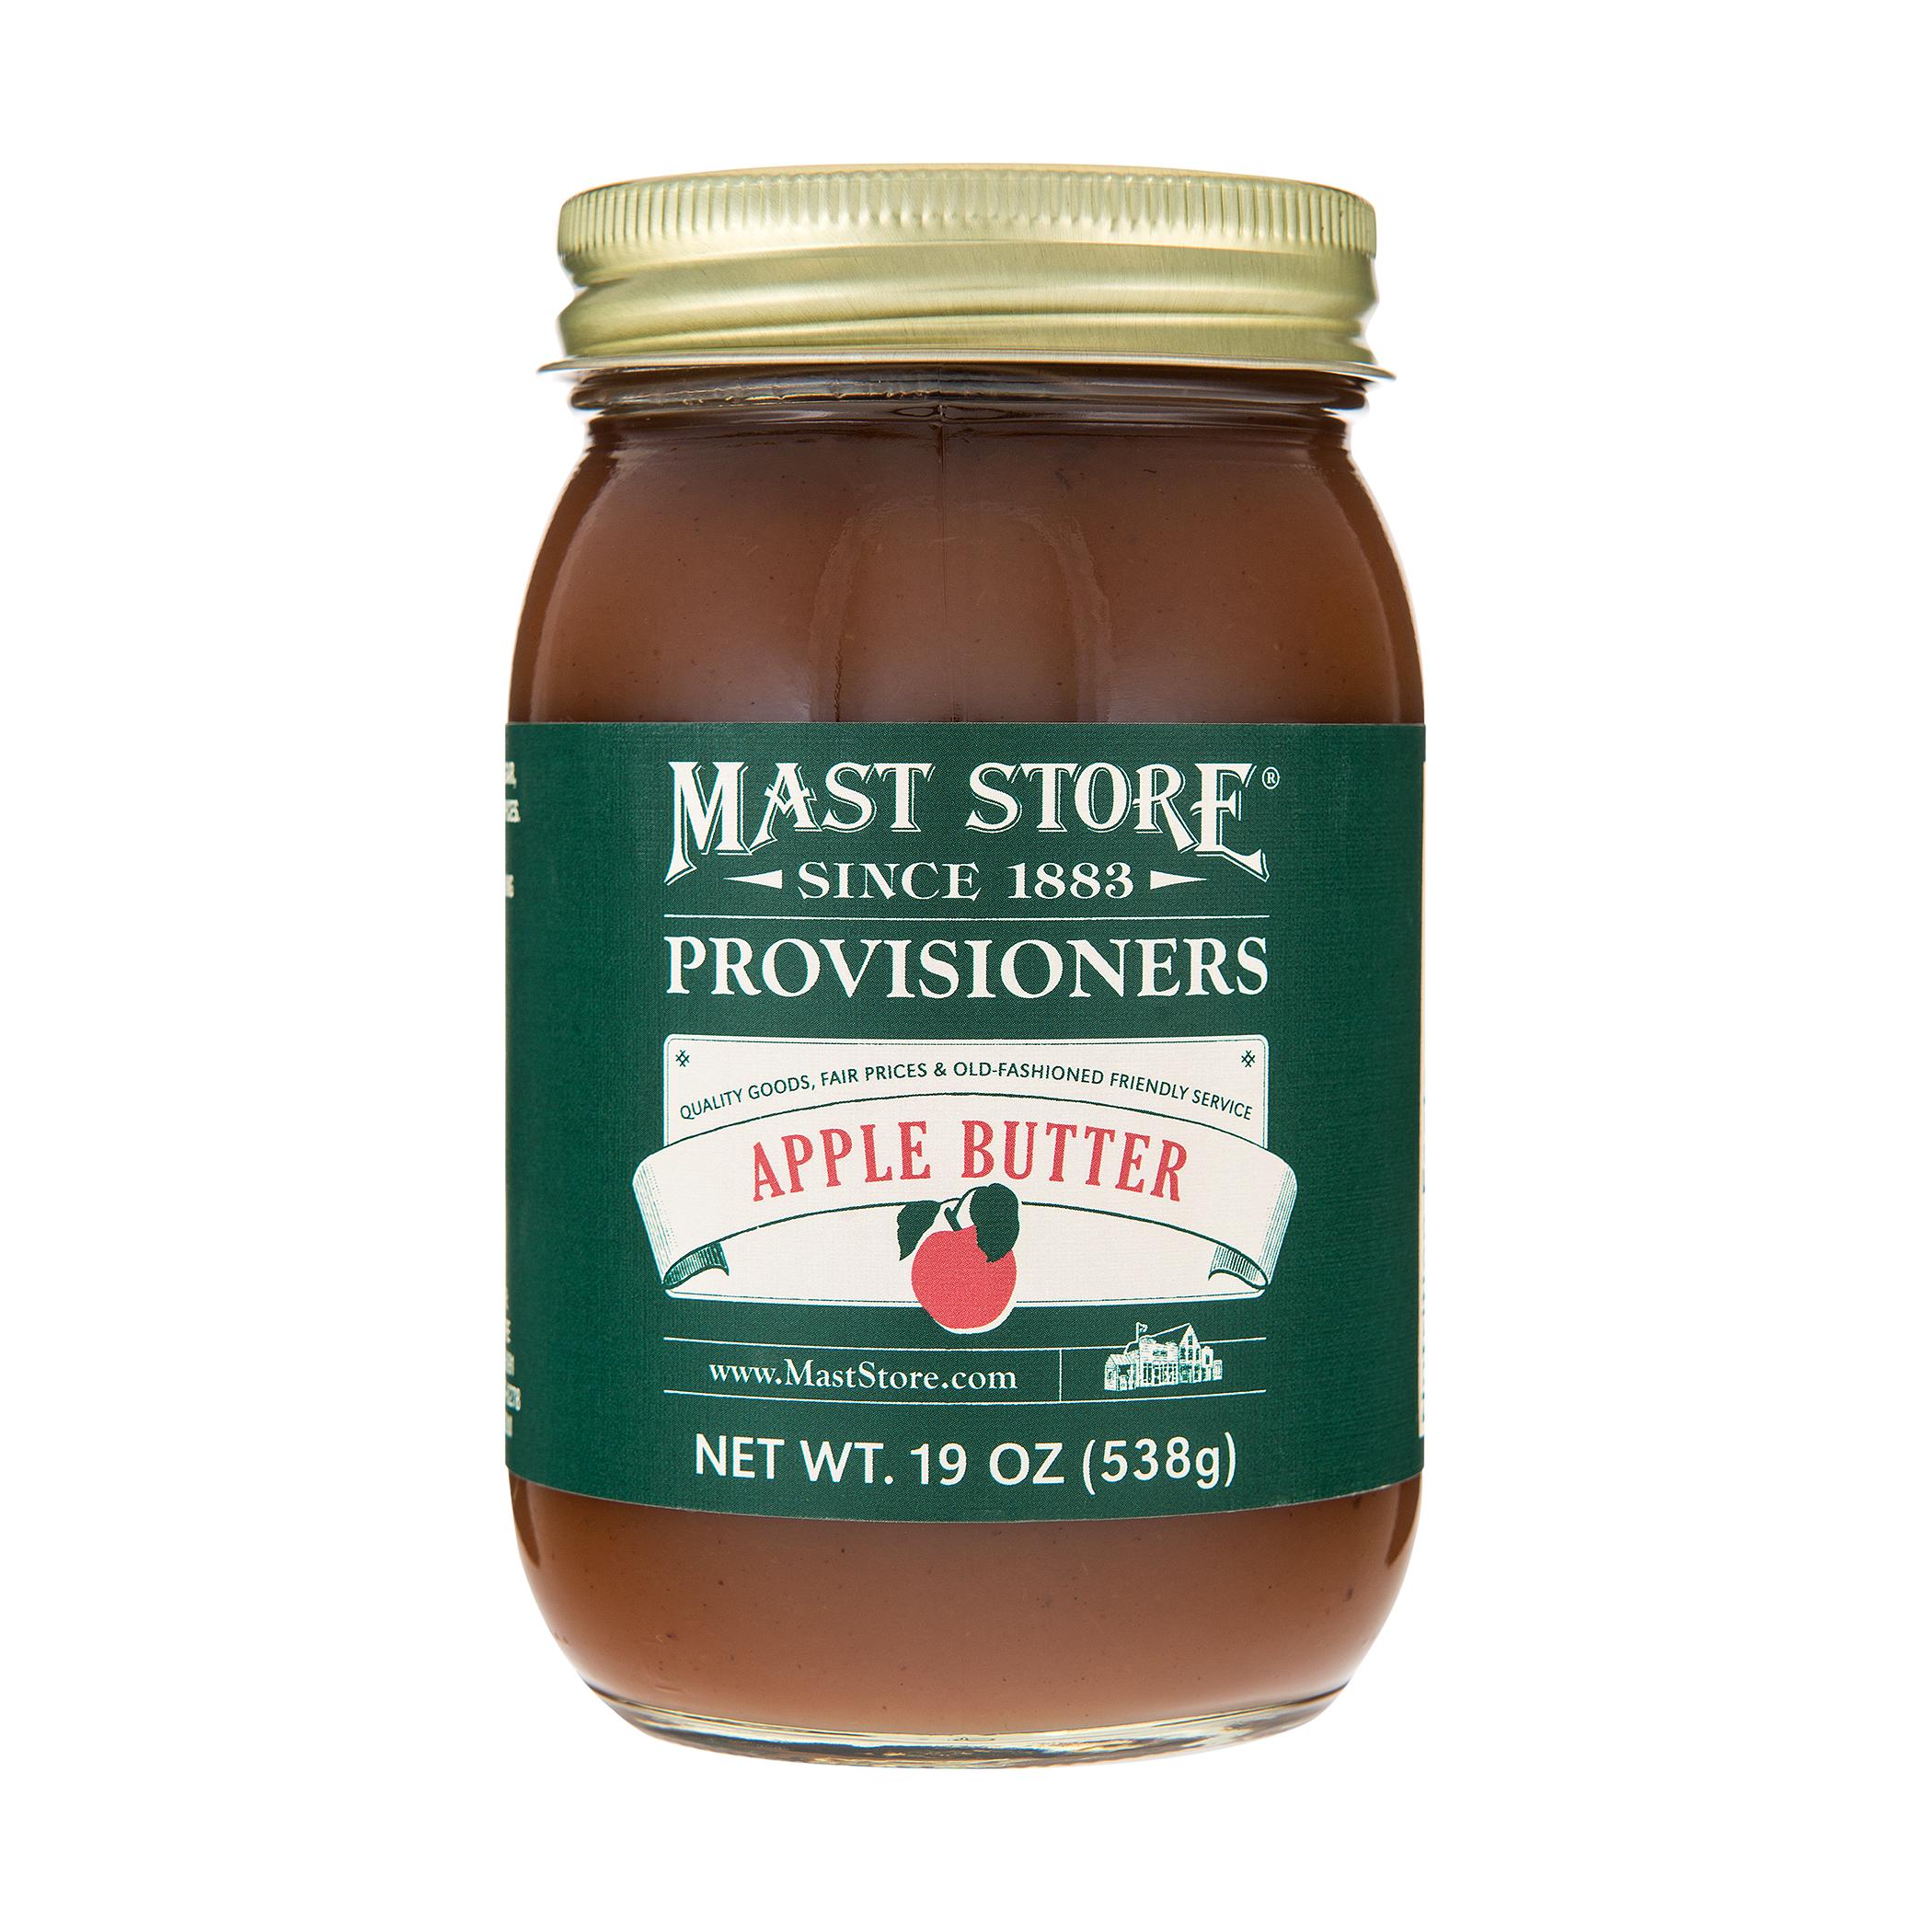  Mast Store Provisioners Apple Butter - Pint